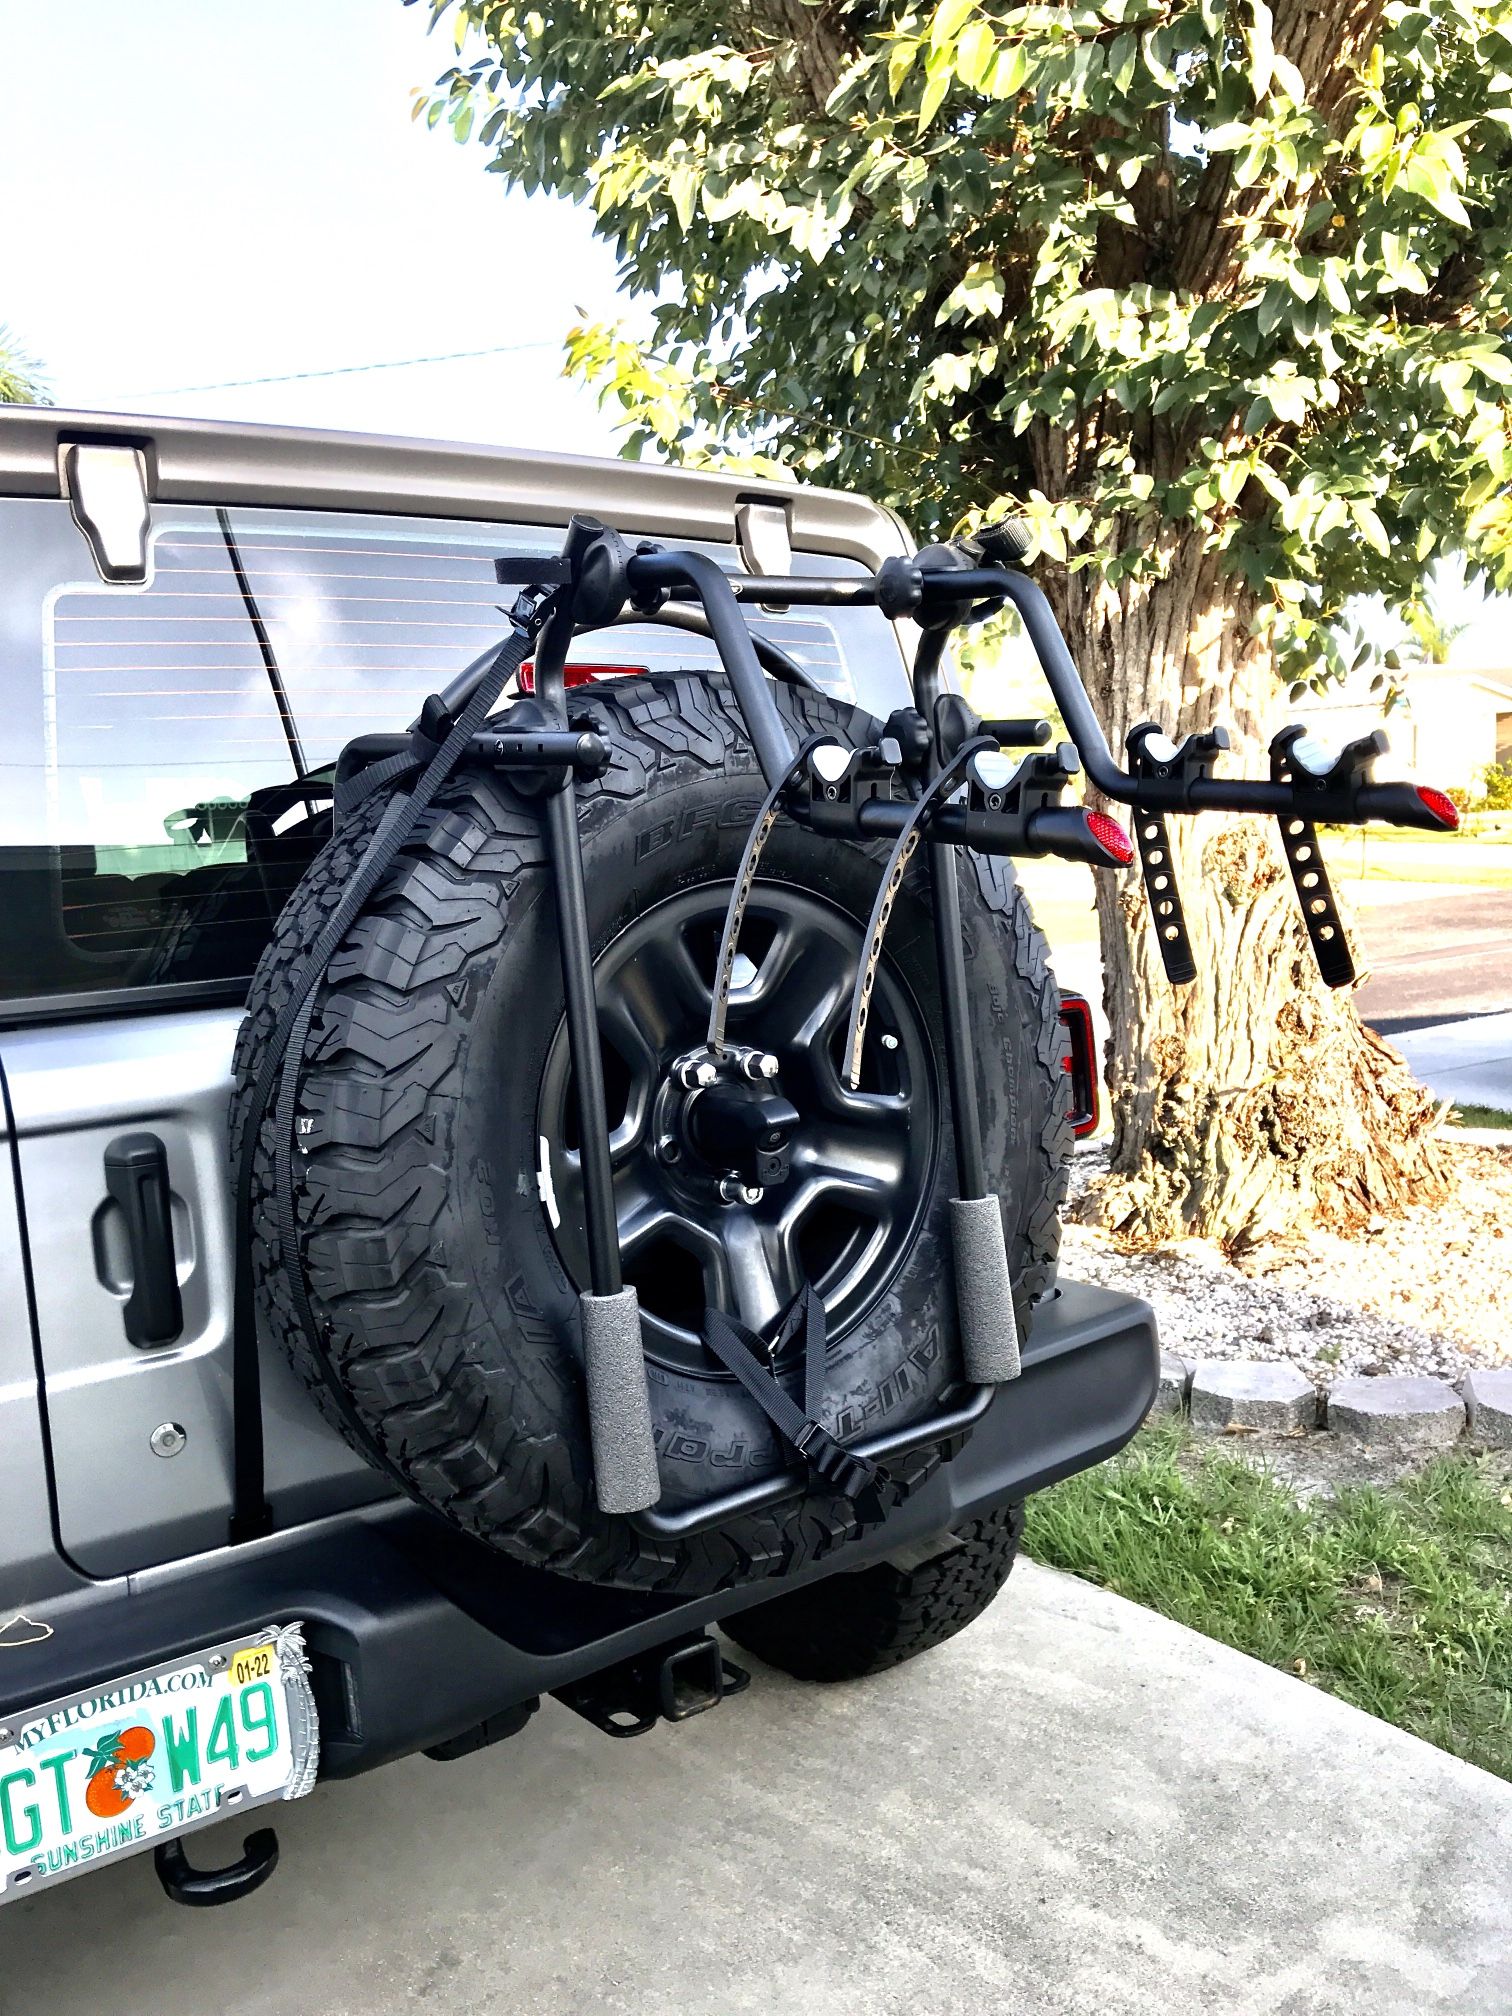 Spare tire bike rack holds two bikes